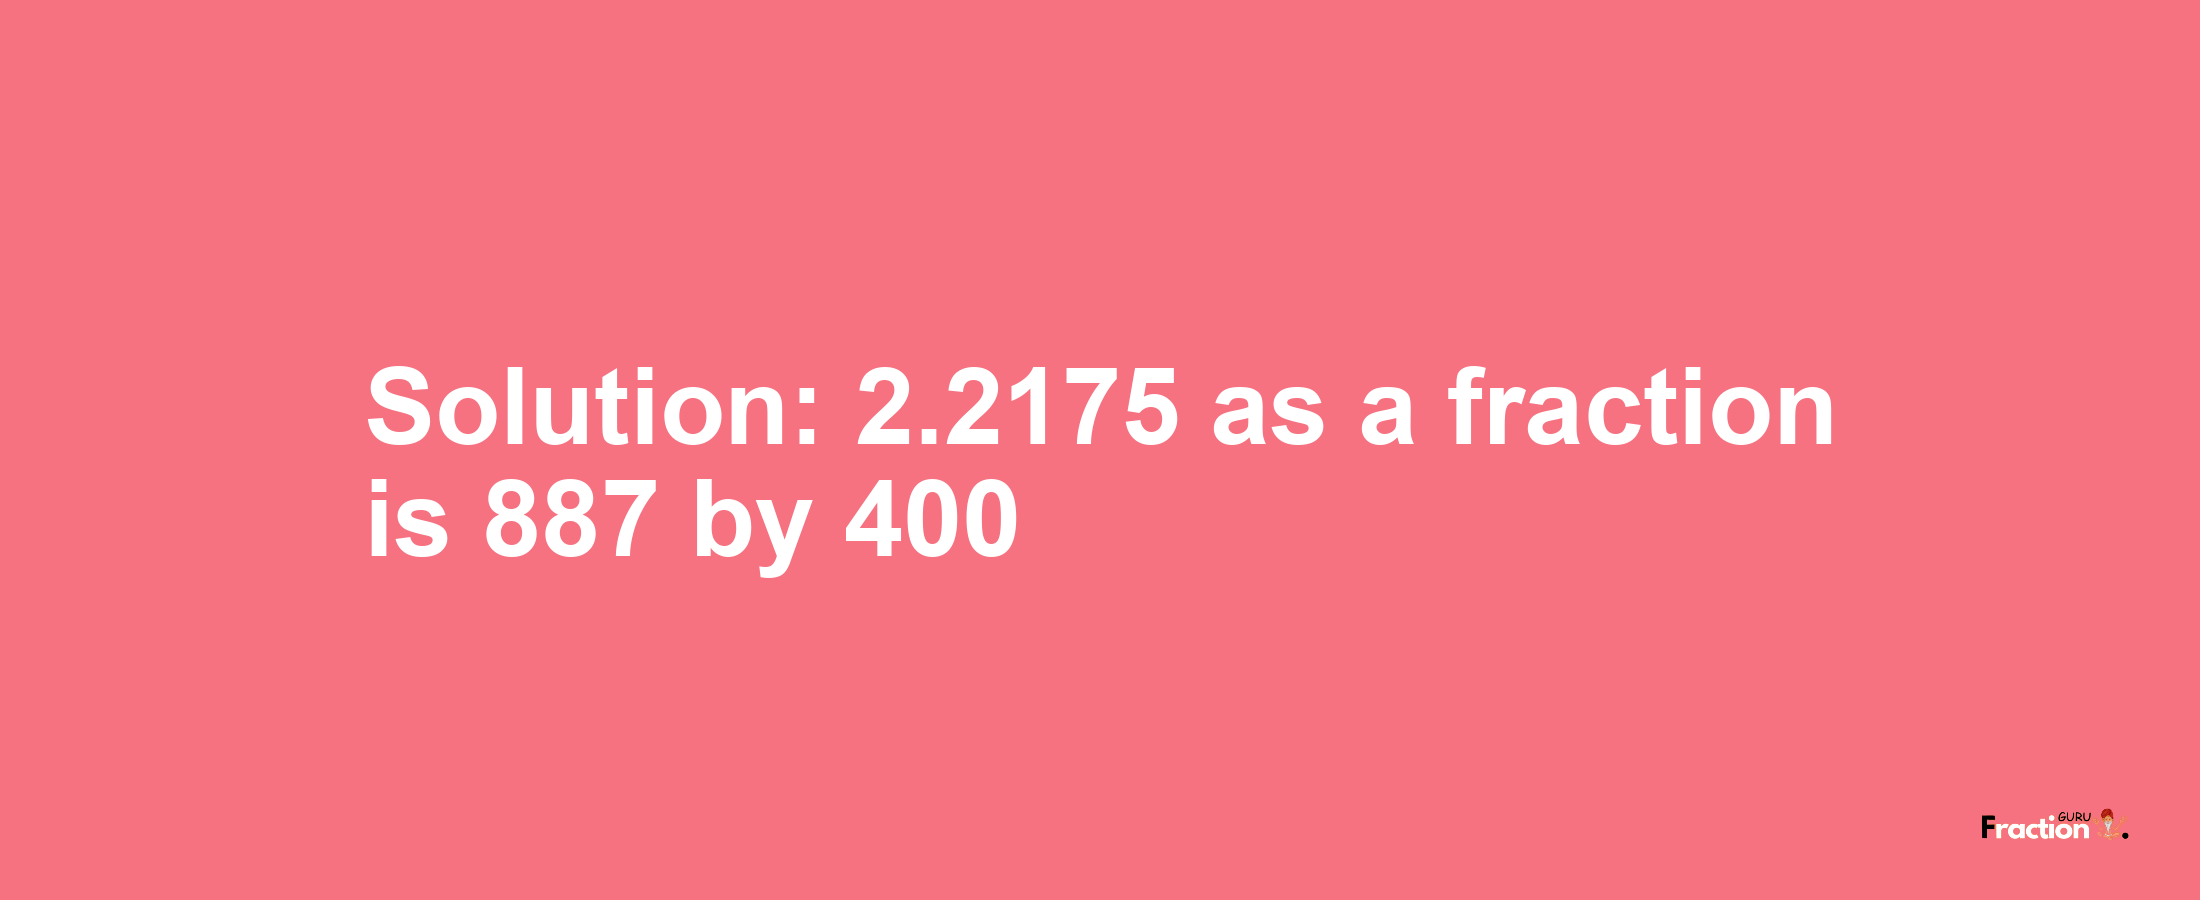 Solution:2.2175 as a fraction is 887/400